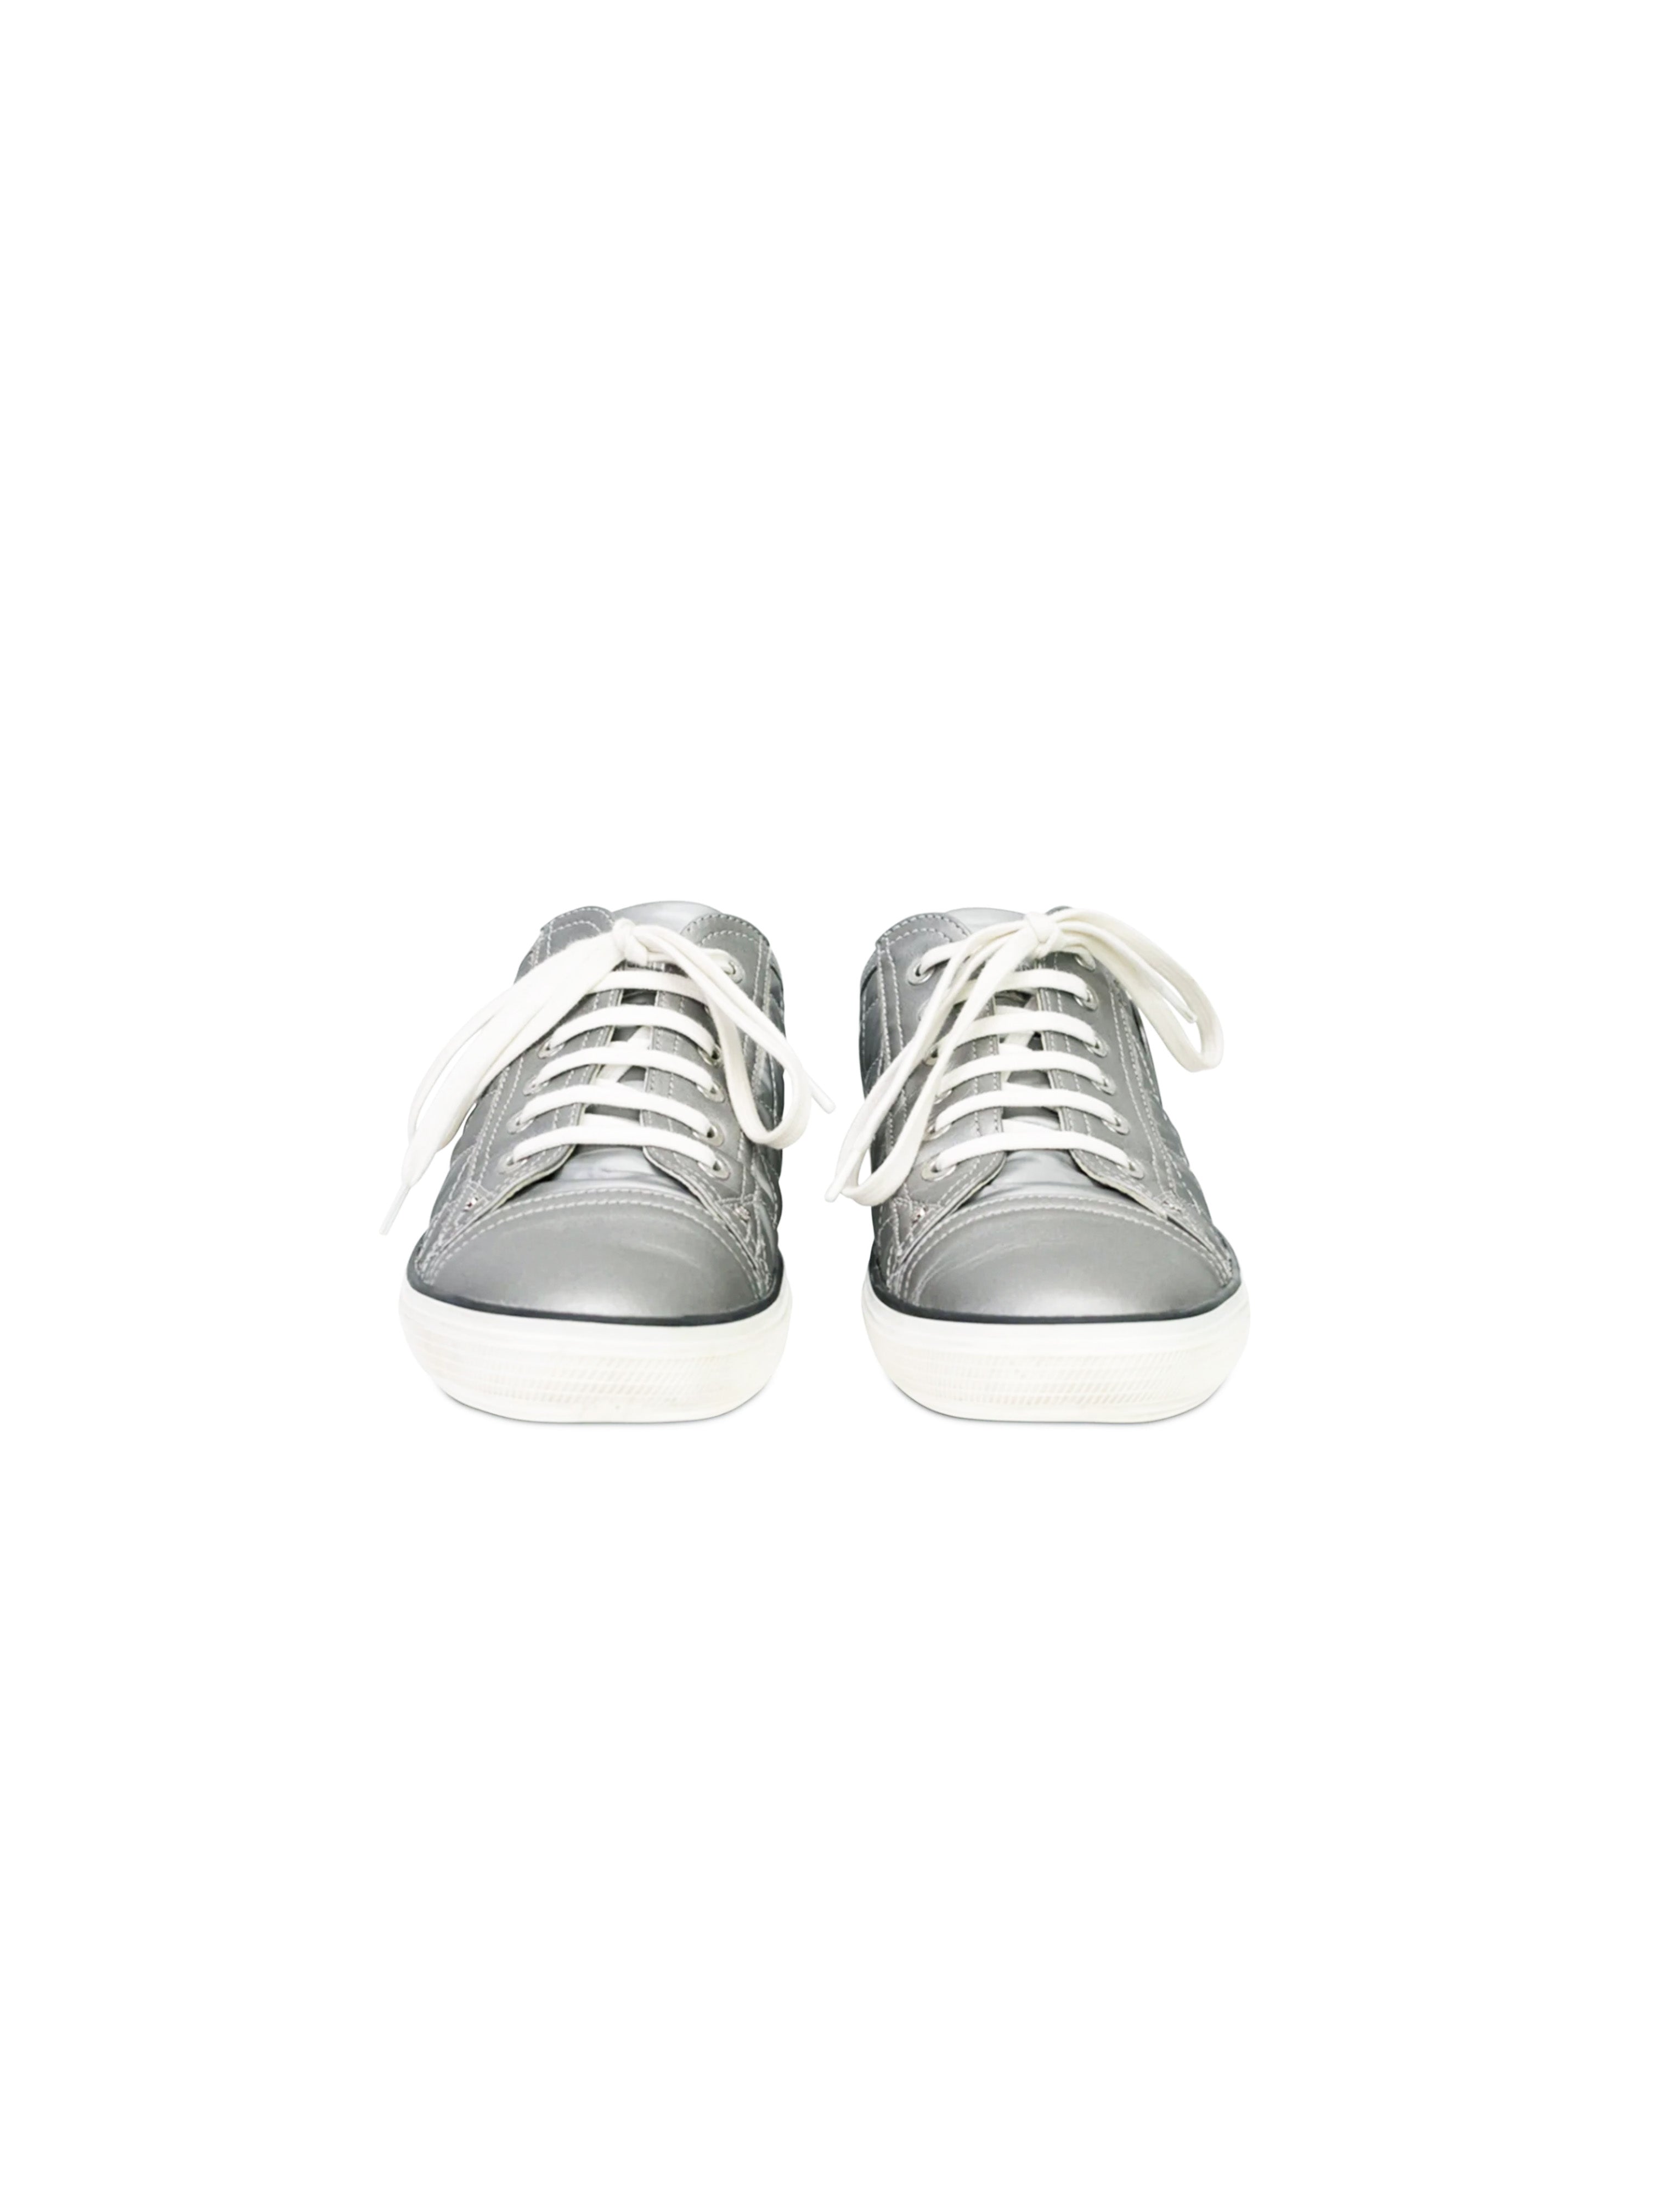 Chanel 2000s Quilted Silver Logo Sneakers